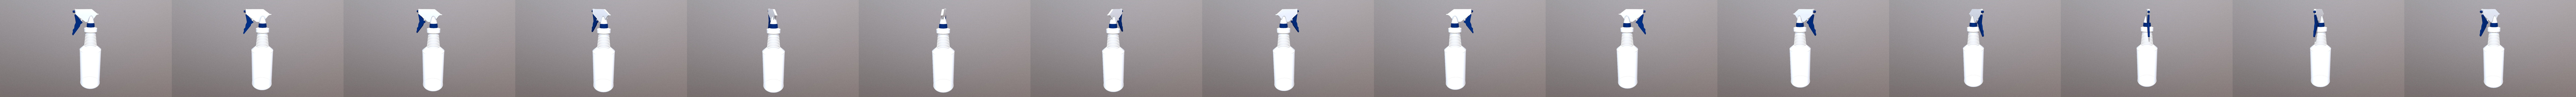 Zep All-Purpose Cleaner Spray Bottle 3D Model by potentialfate